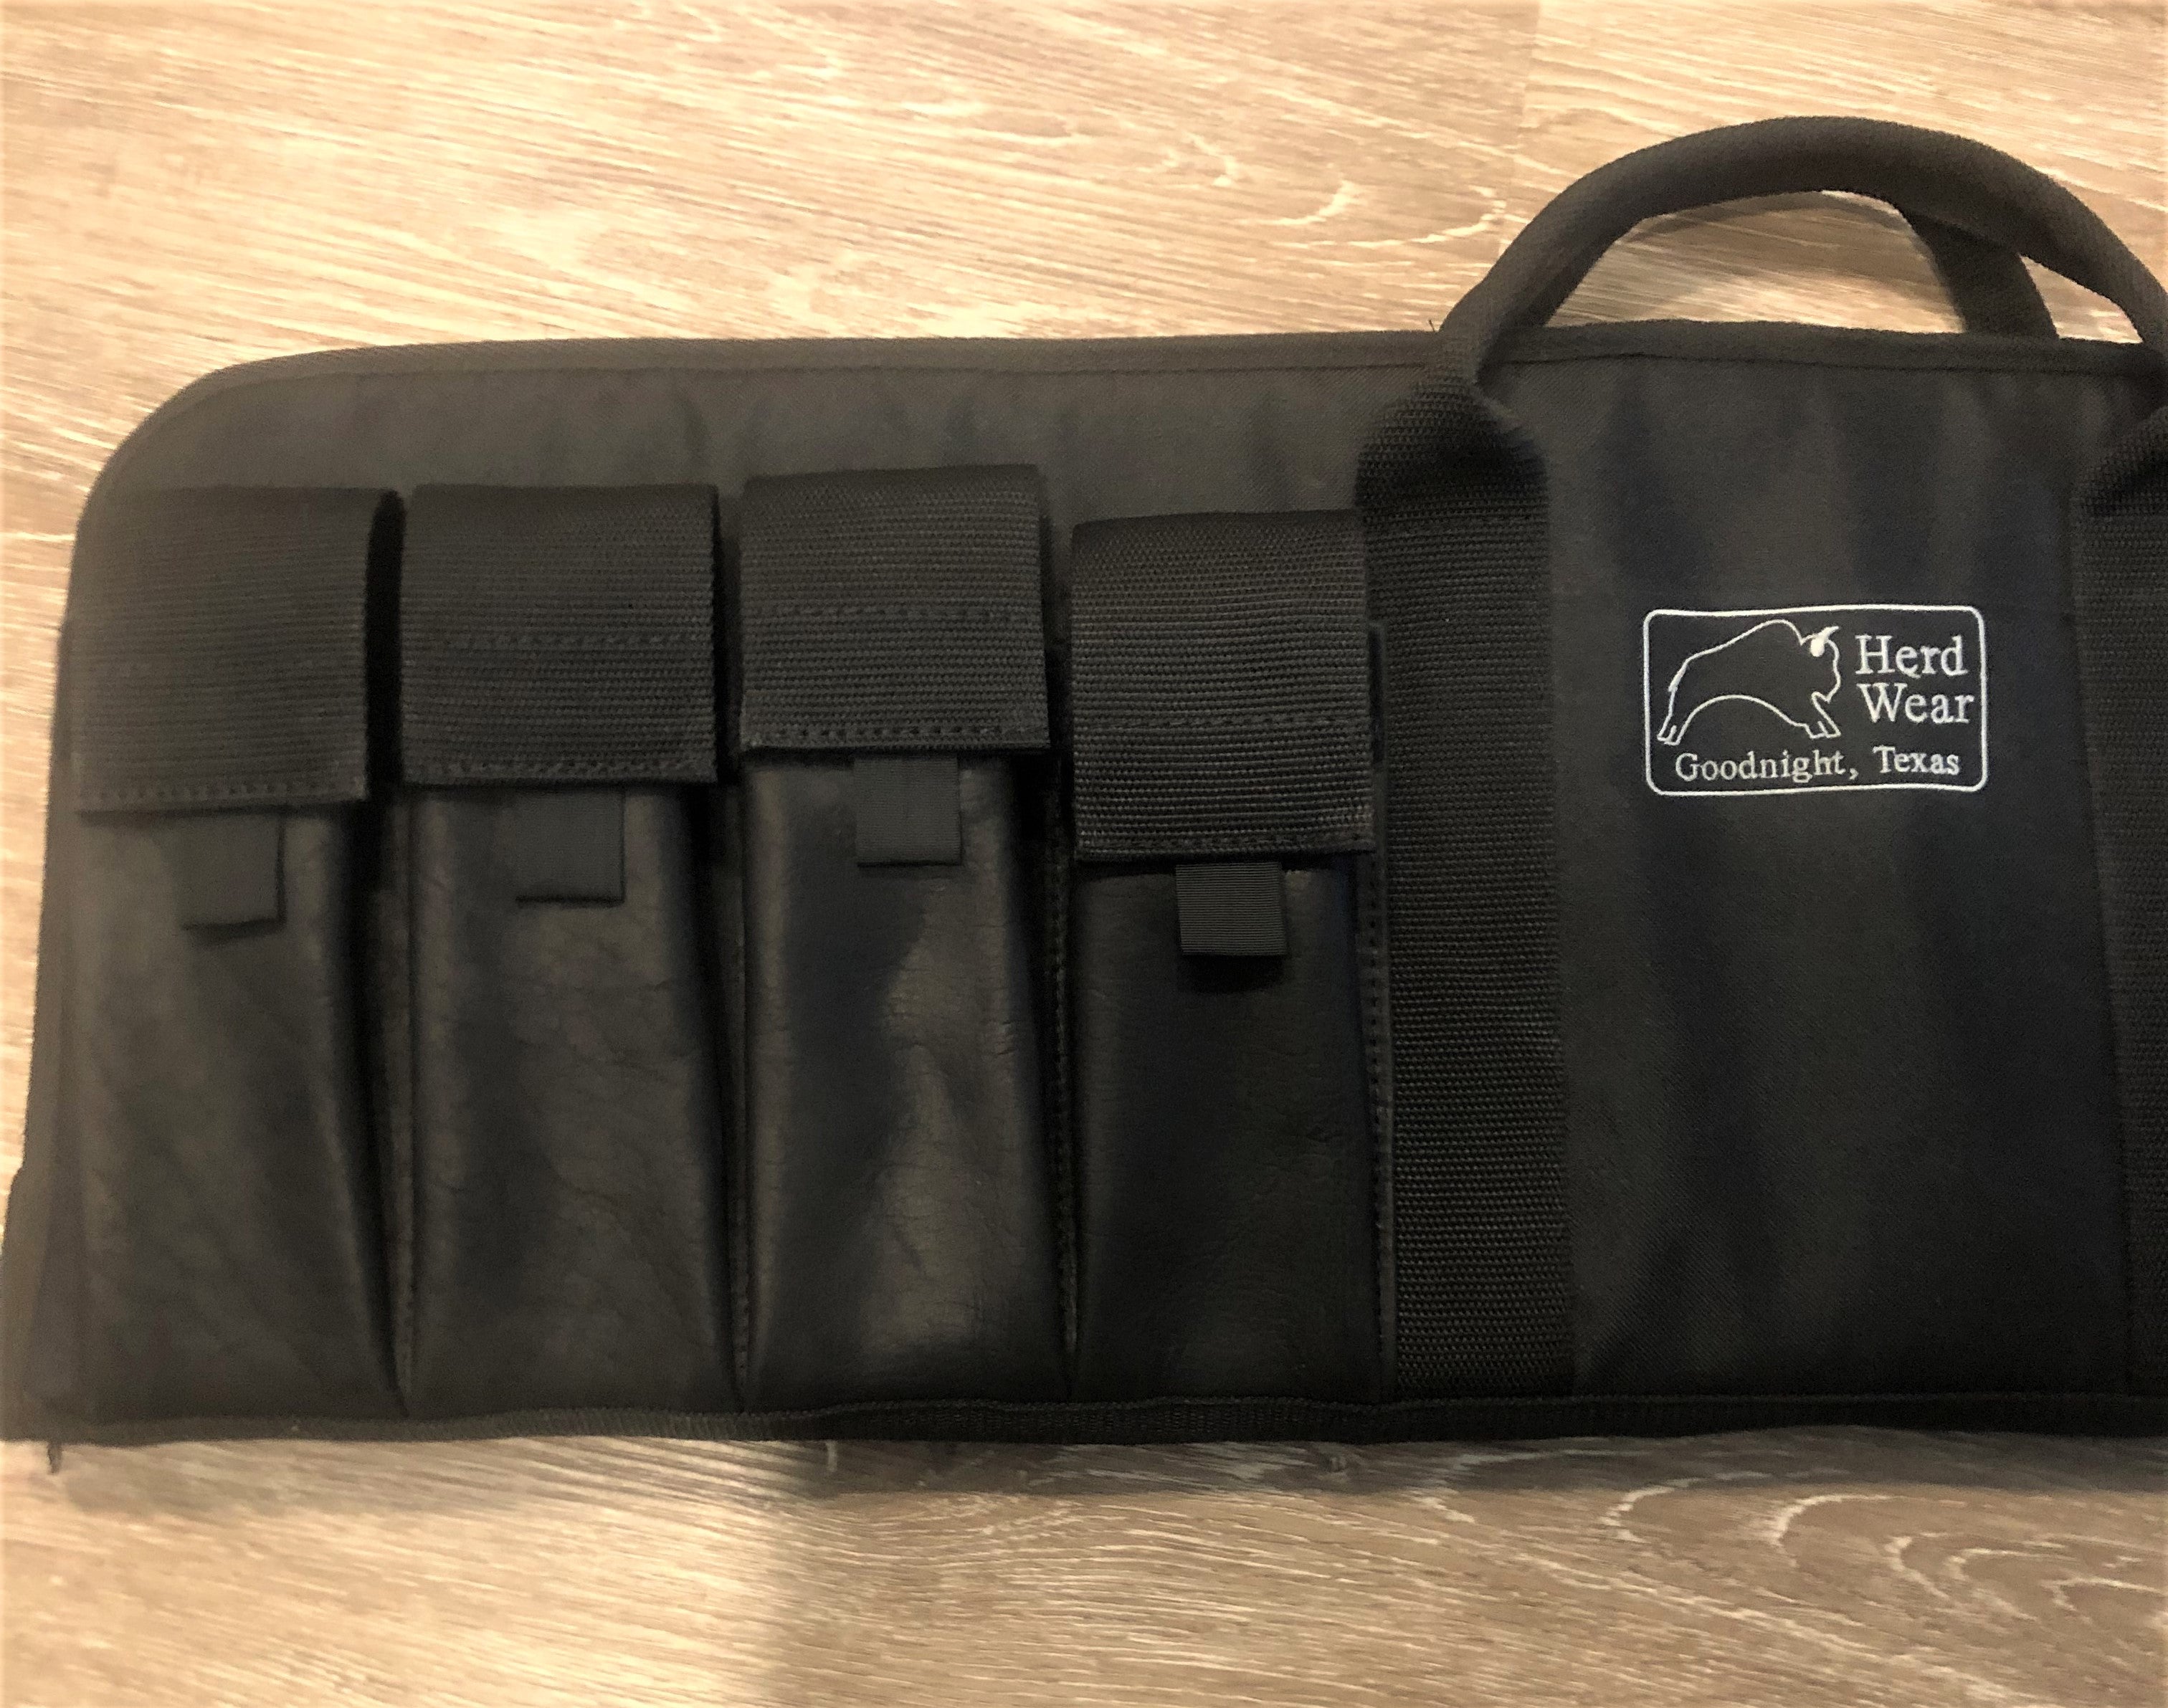 AR - 15 soft carry/storage case, with bison leather clip pouches